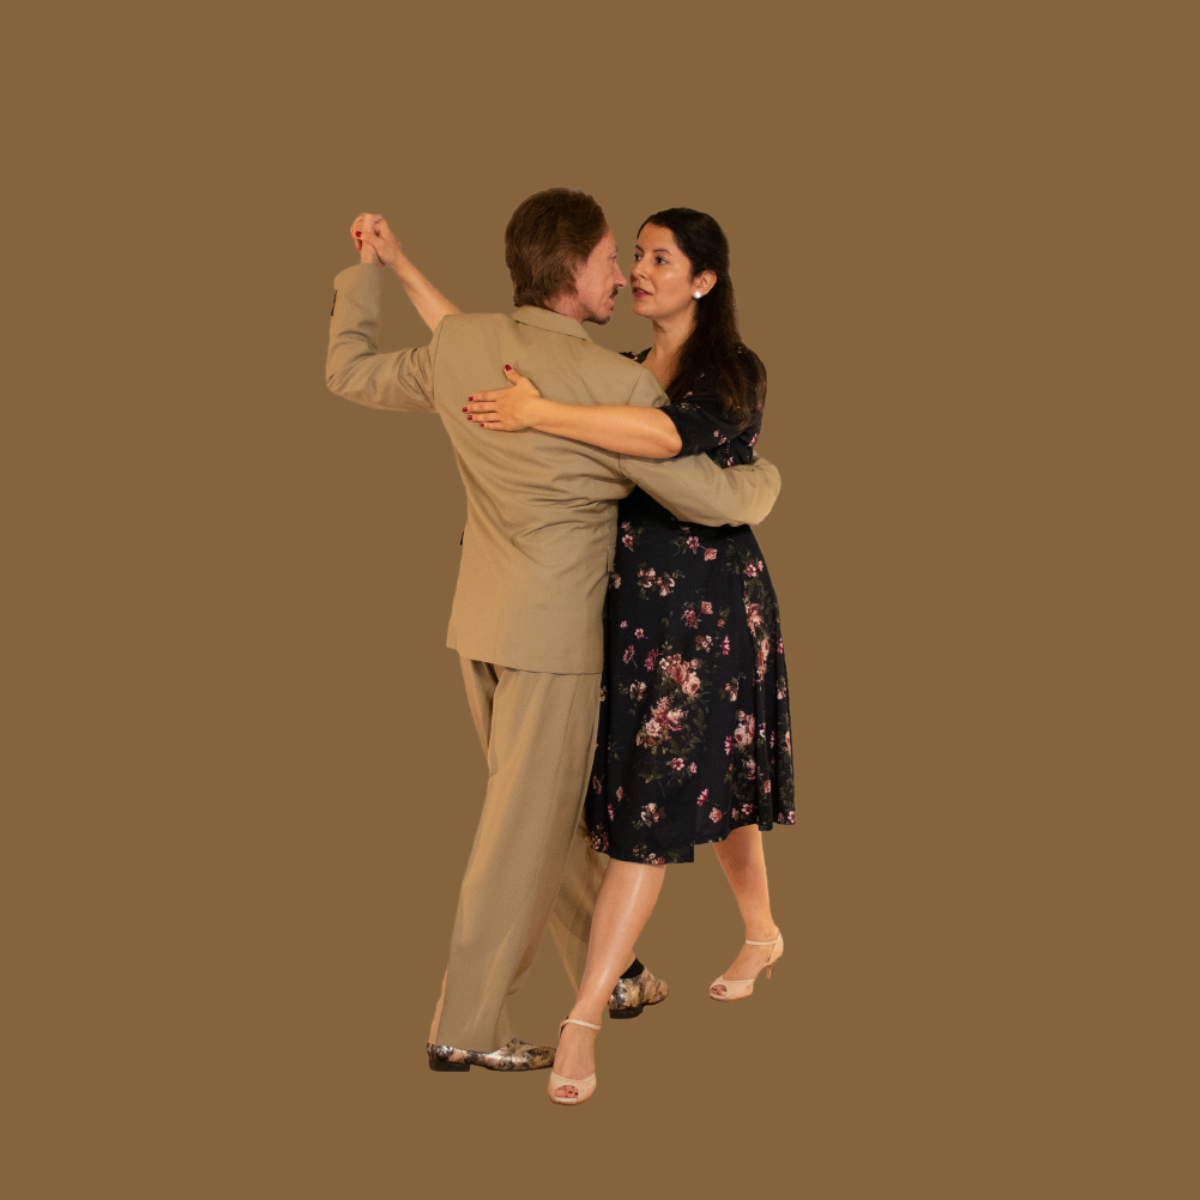 Considerations on the value of Argentine Tango